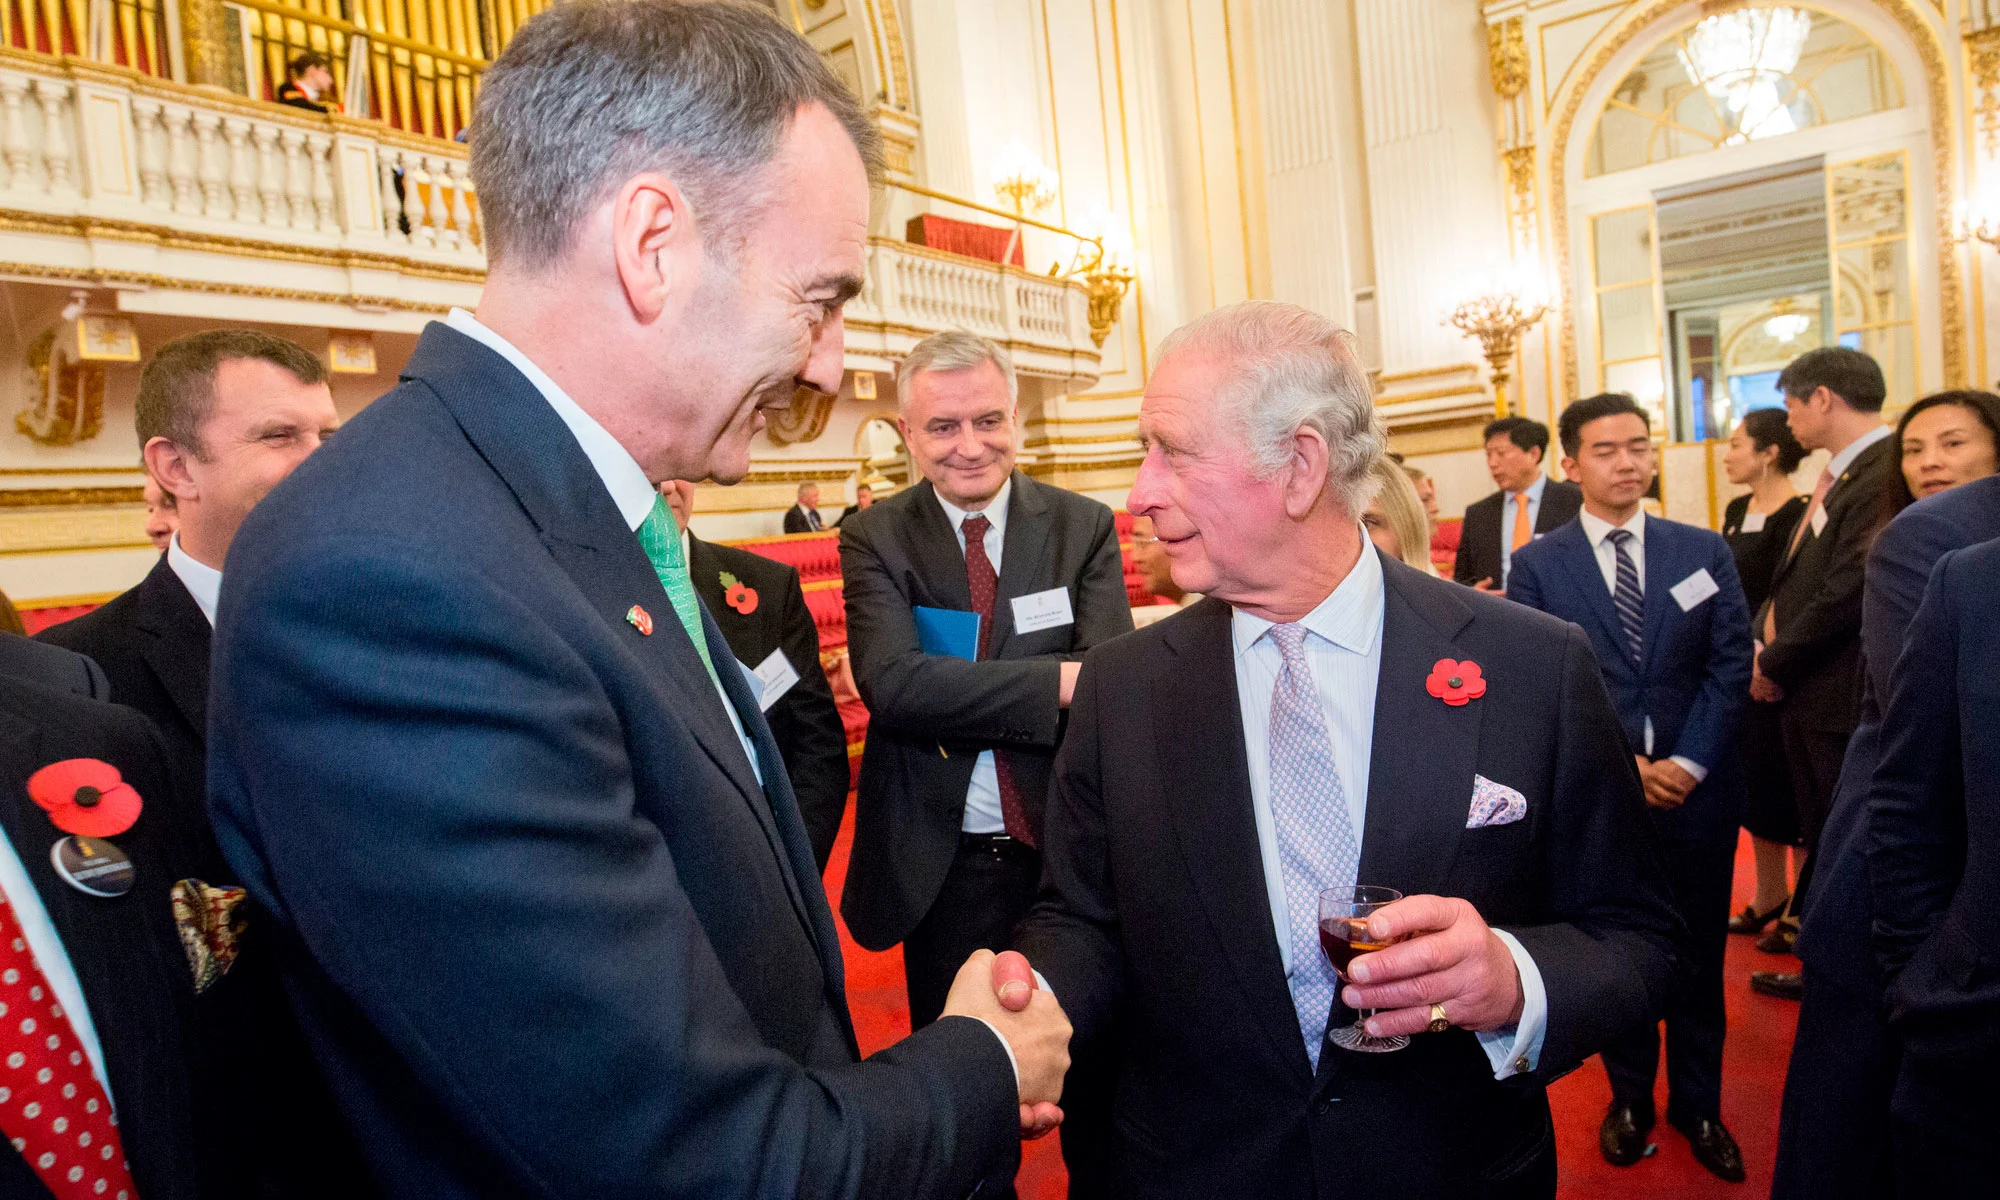 bp CEO is greeted by the King at Buckingham Palace